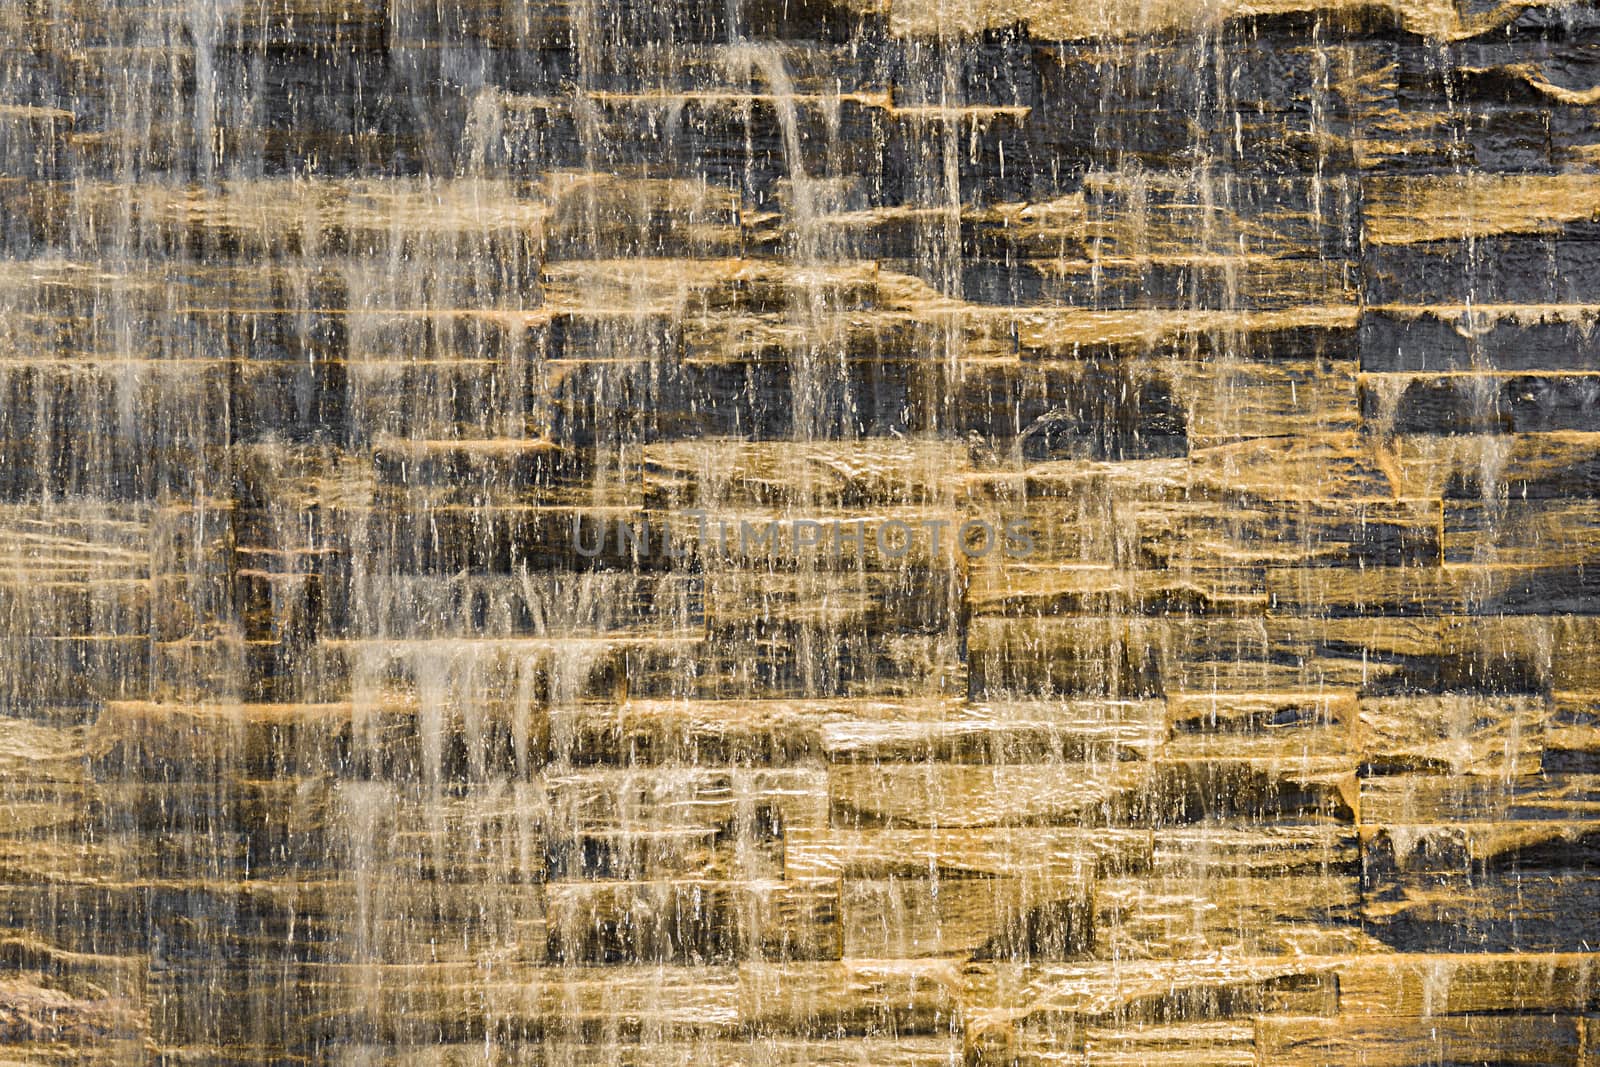 Falling water stream against stonework rough texture with night backlight